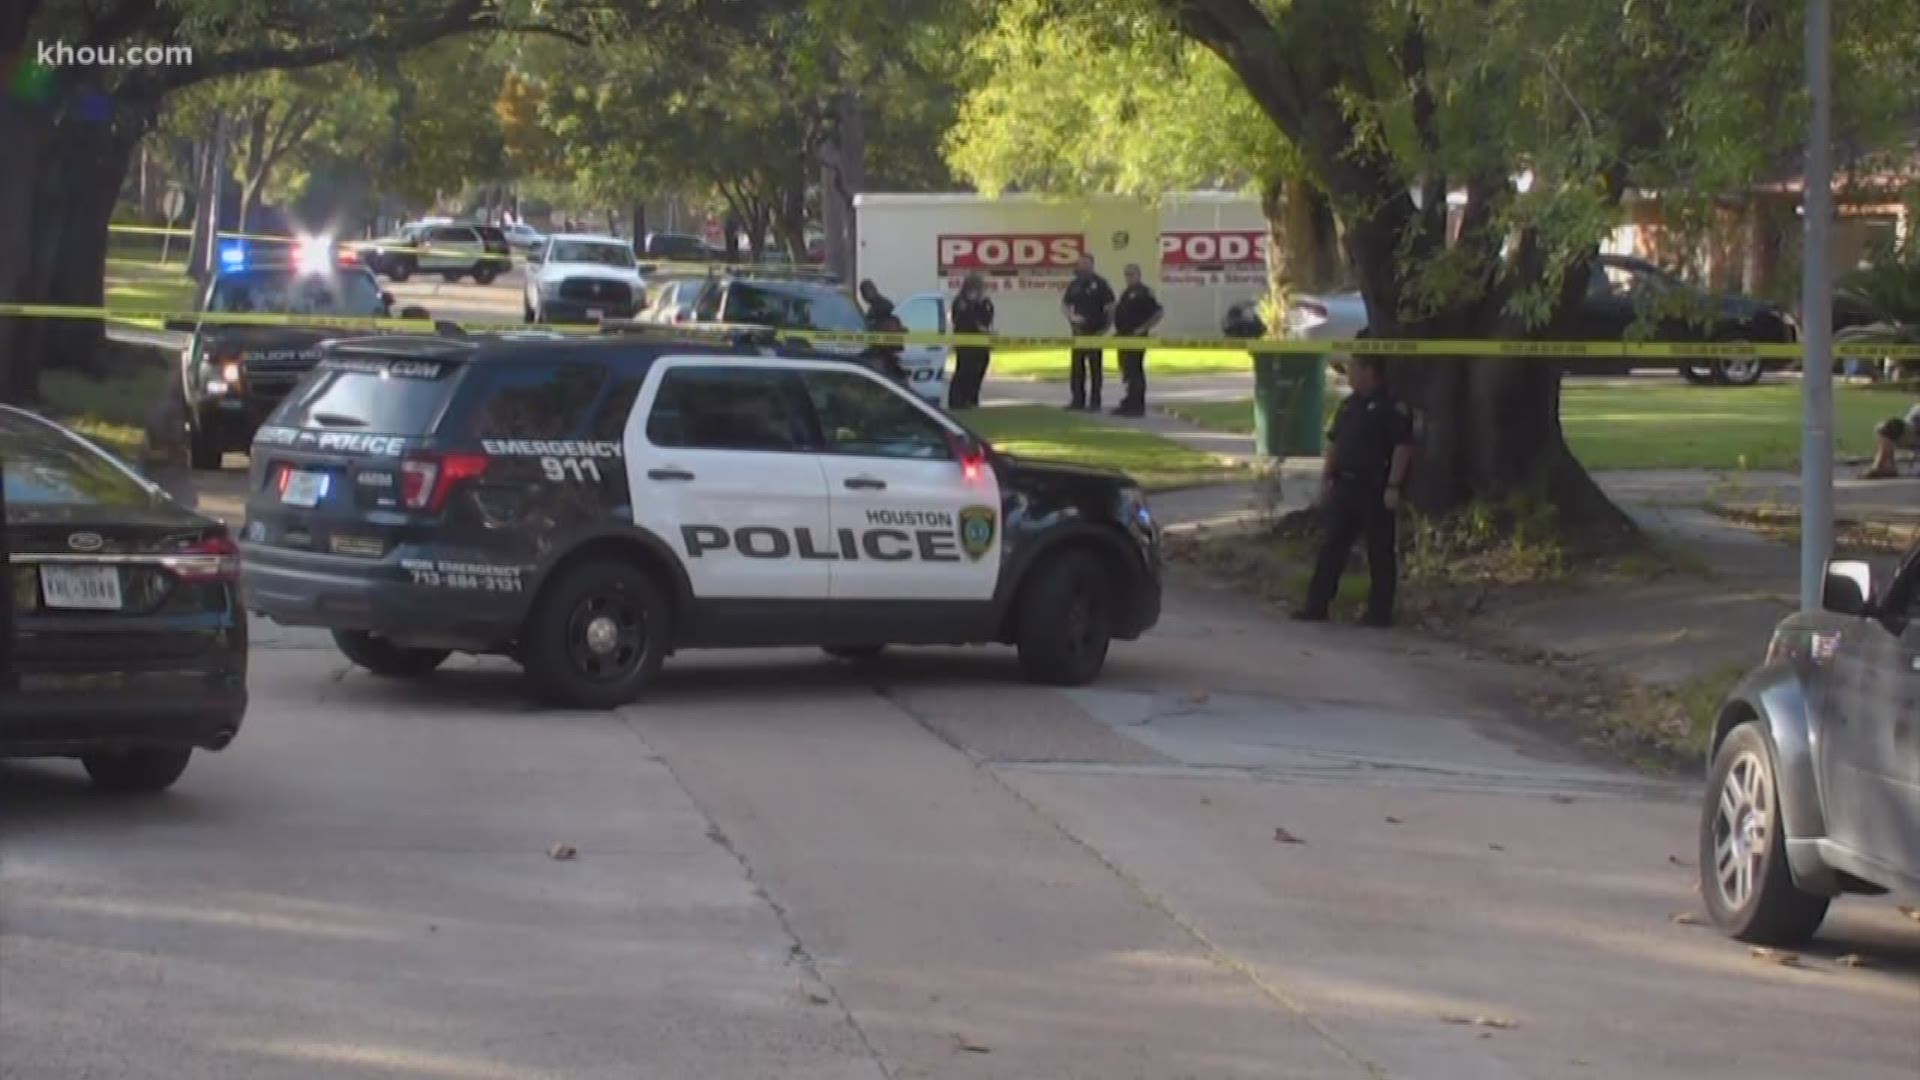 Houston police said a robbery suspect who tried to break into a home was shot and killed with his own gun.